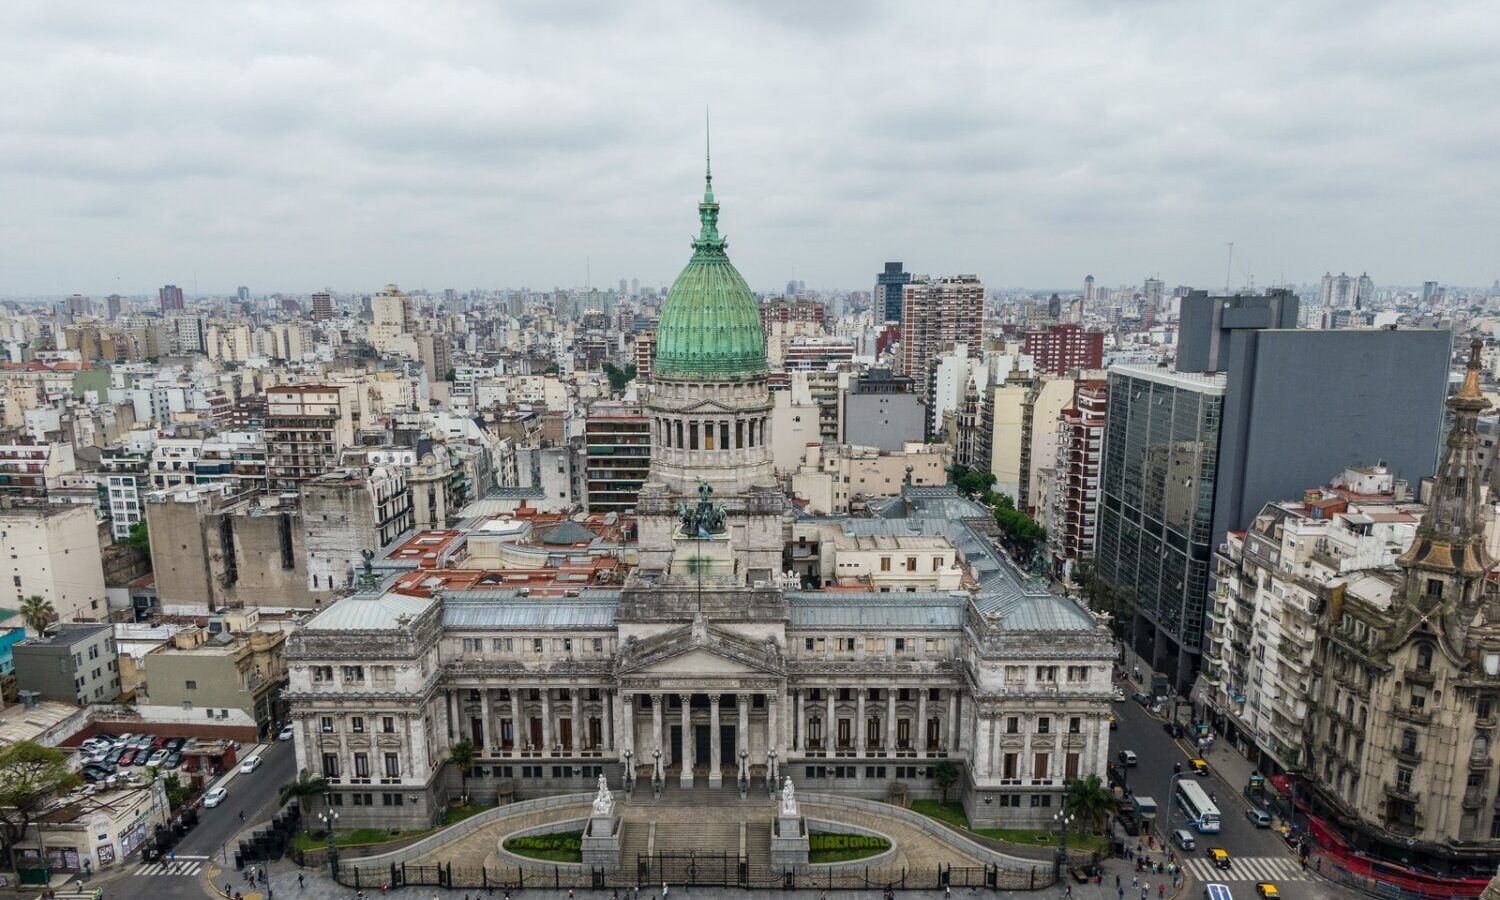 Argentina President Signs Law Regulating Medical Cannabis And Hemp, What’s Next?